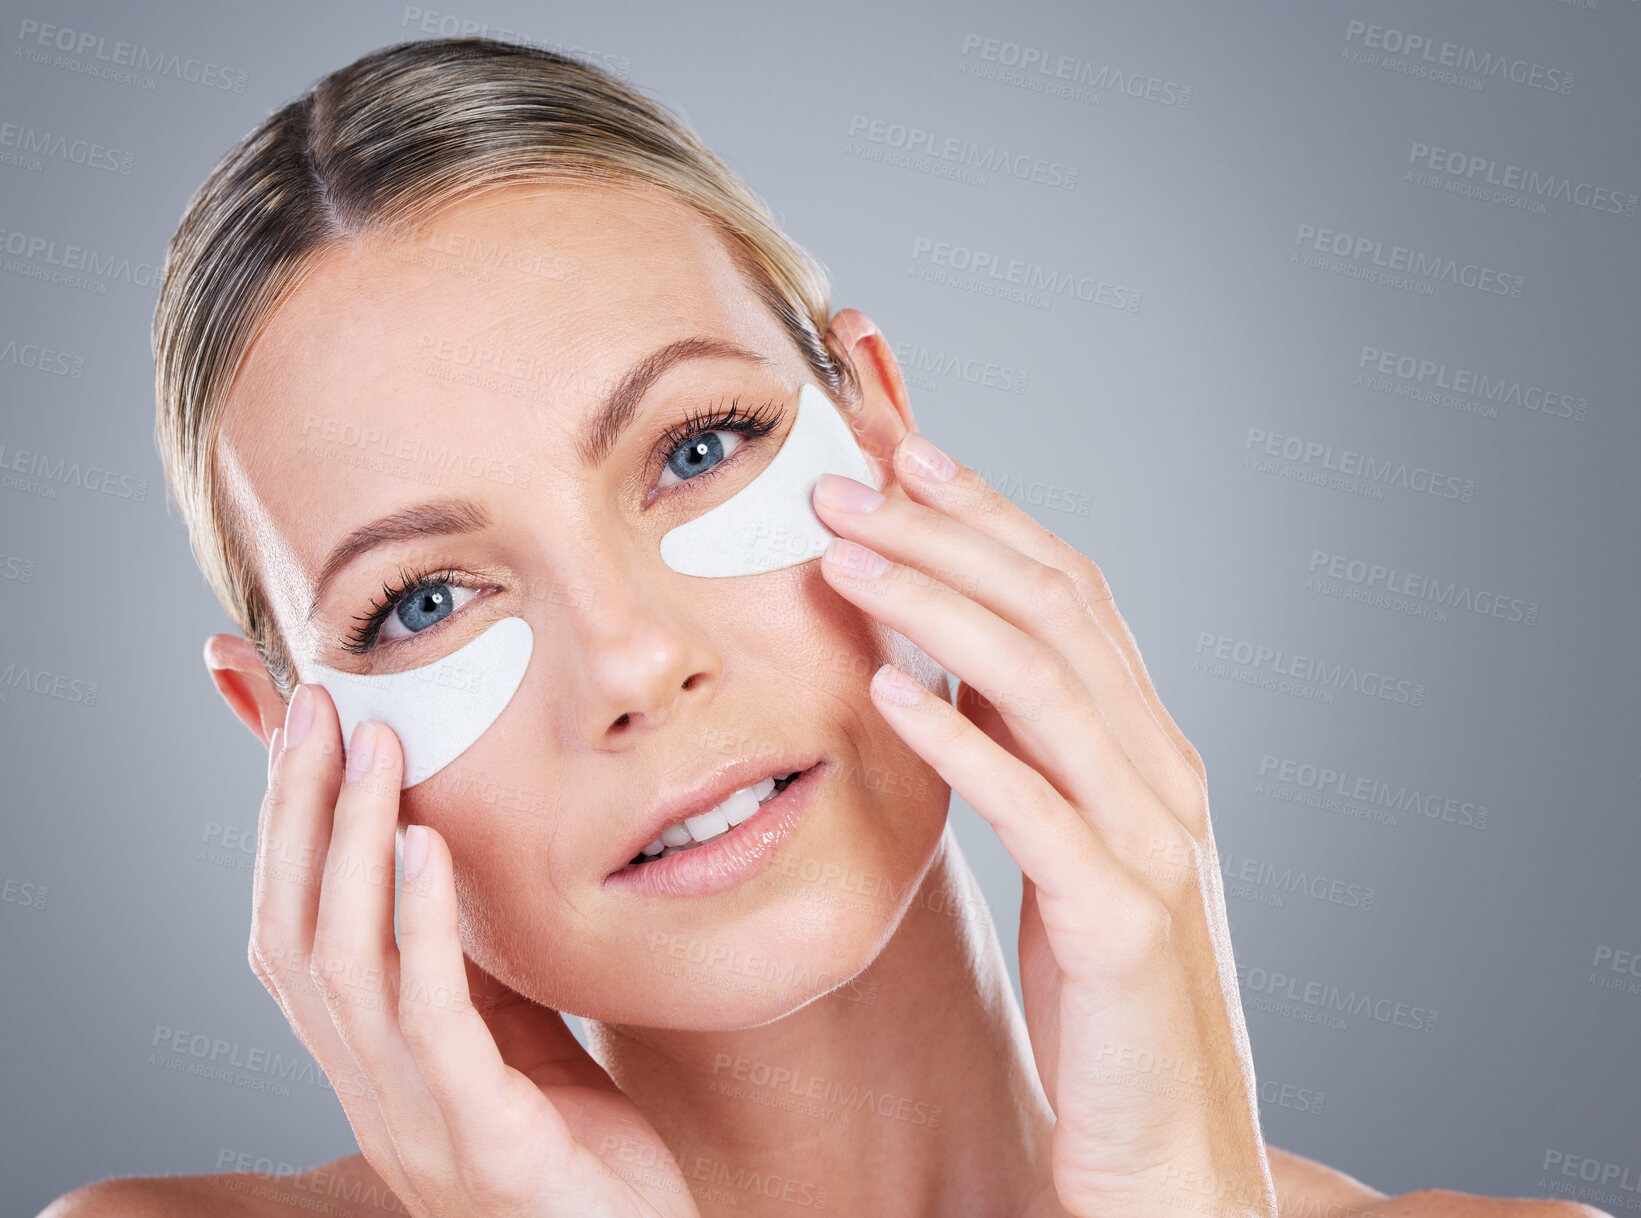 Buy stock photo Studio portrait of an attractive mature woman wearing under eye patches against a grey background